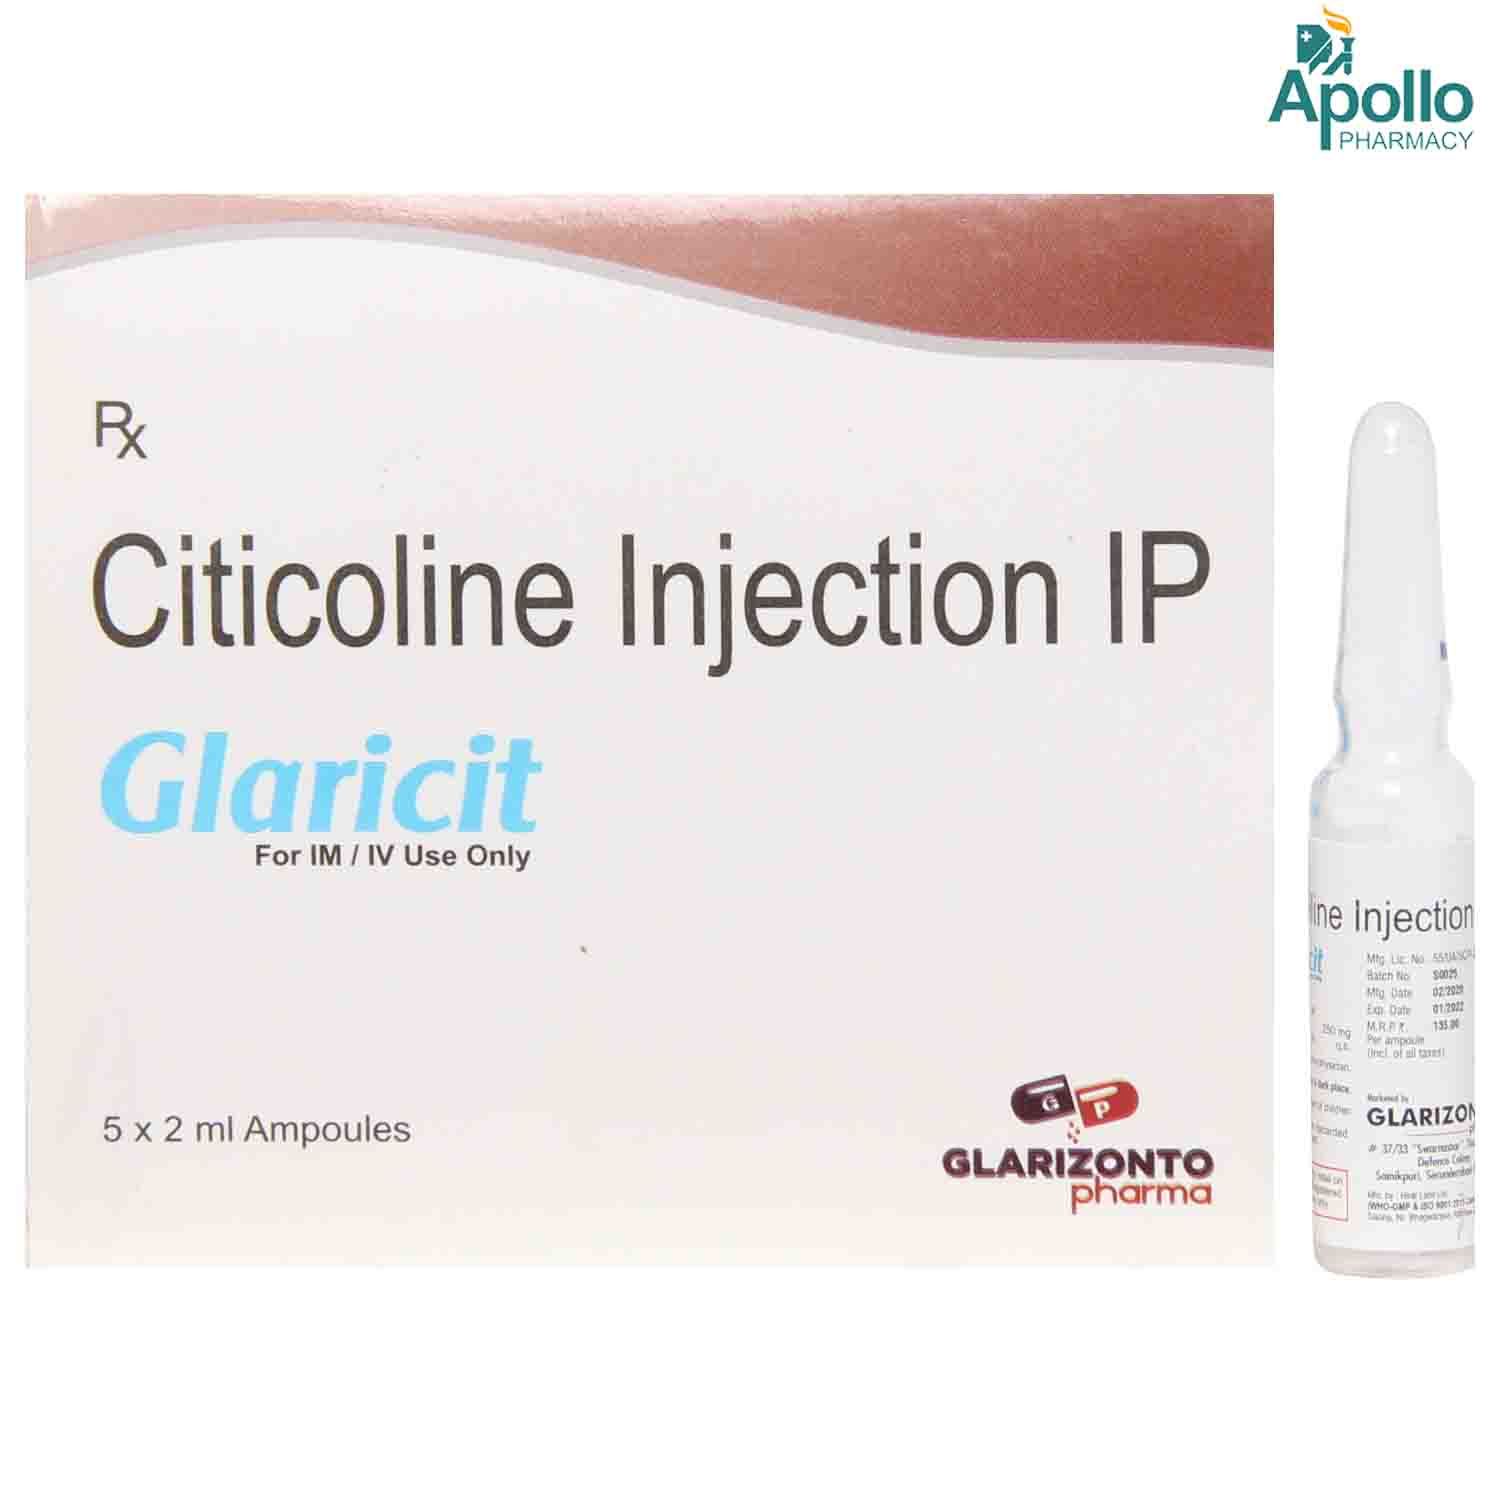 Glaricit 250mg Injection 2ml, Pack of 1 Injection